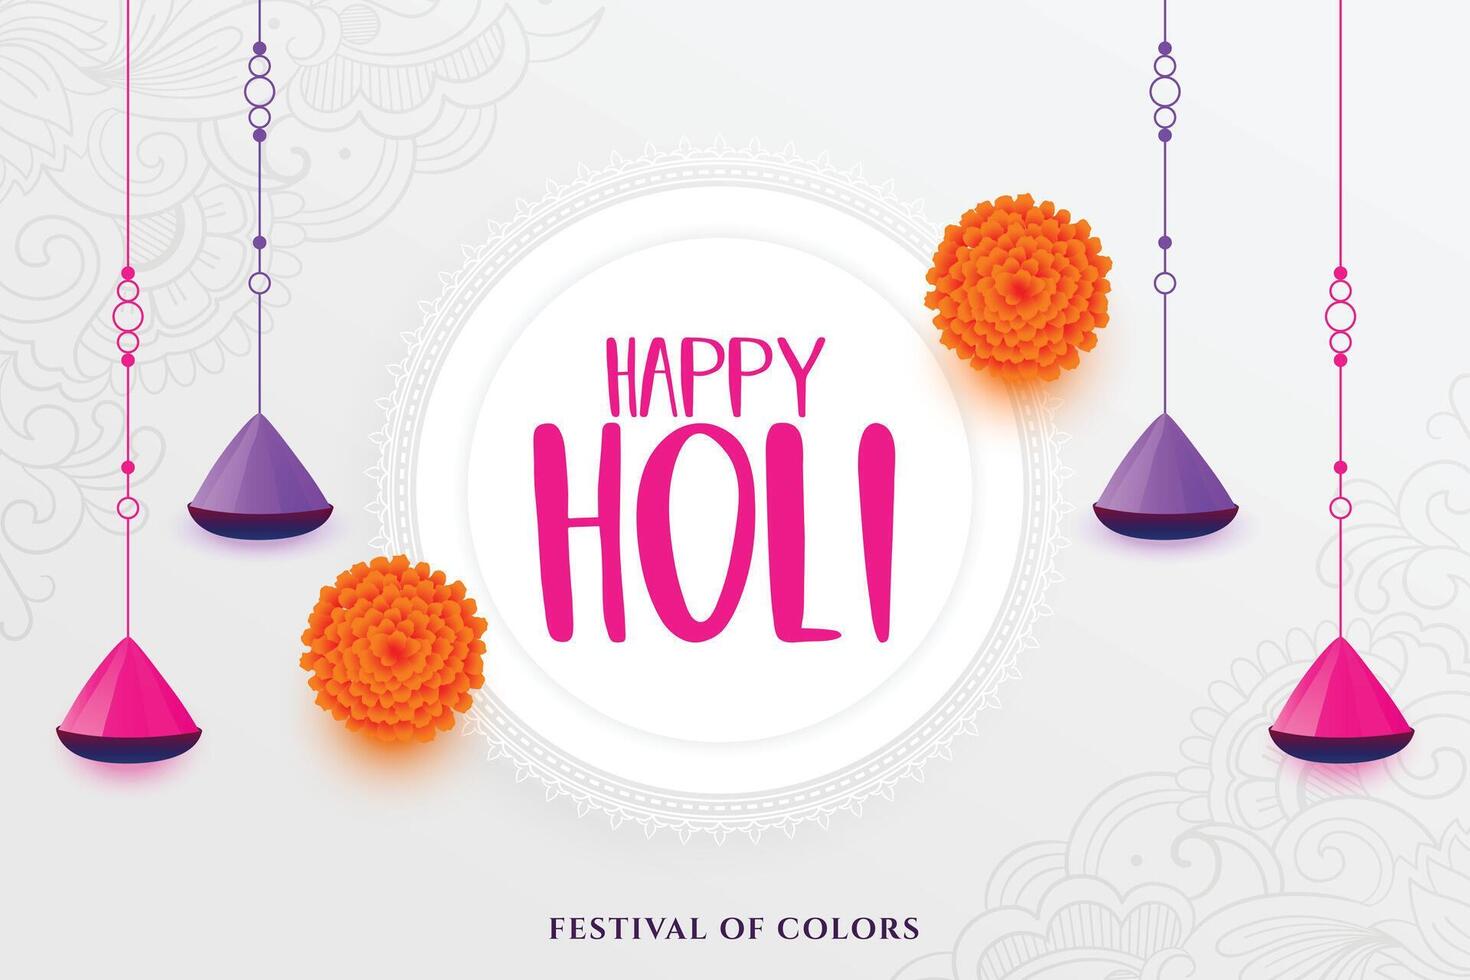 holi festival background with hanging gulaal and flowers vector